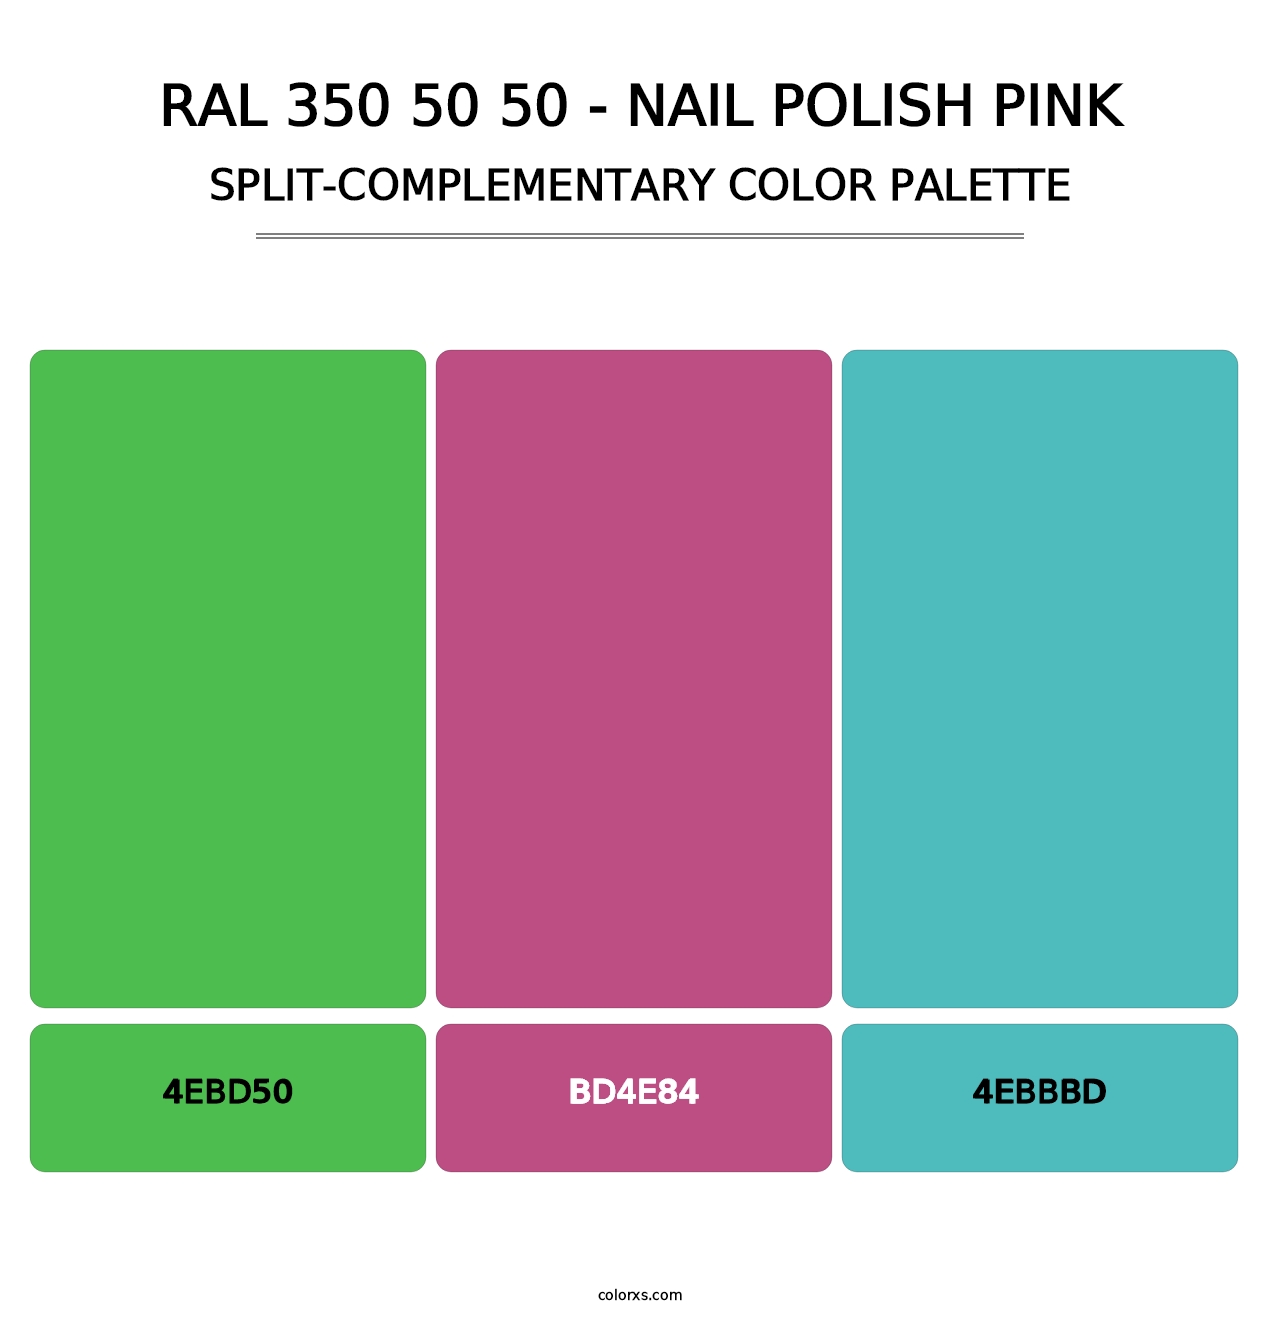 RAL 350 50 50 - Nail Polish Pink - Split-Complementary Color Palette